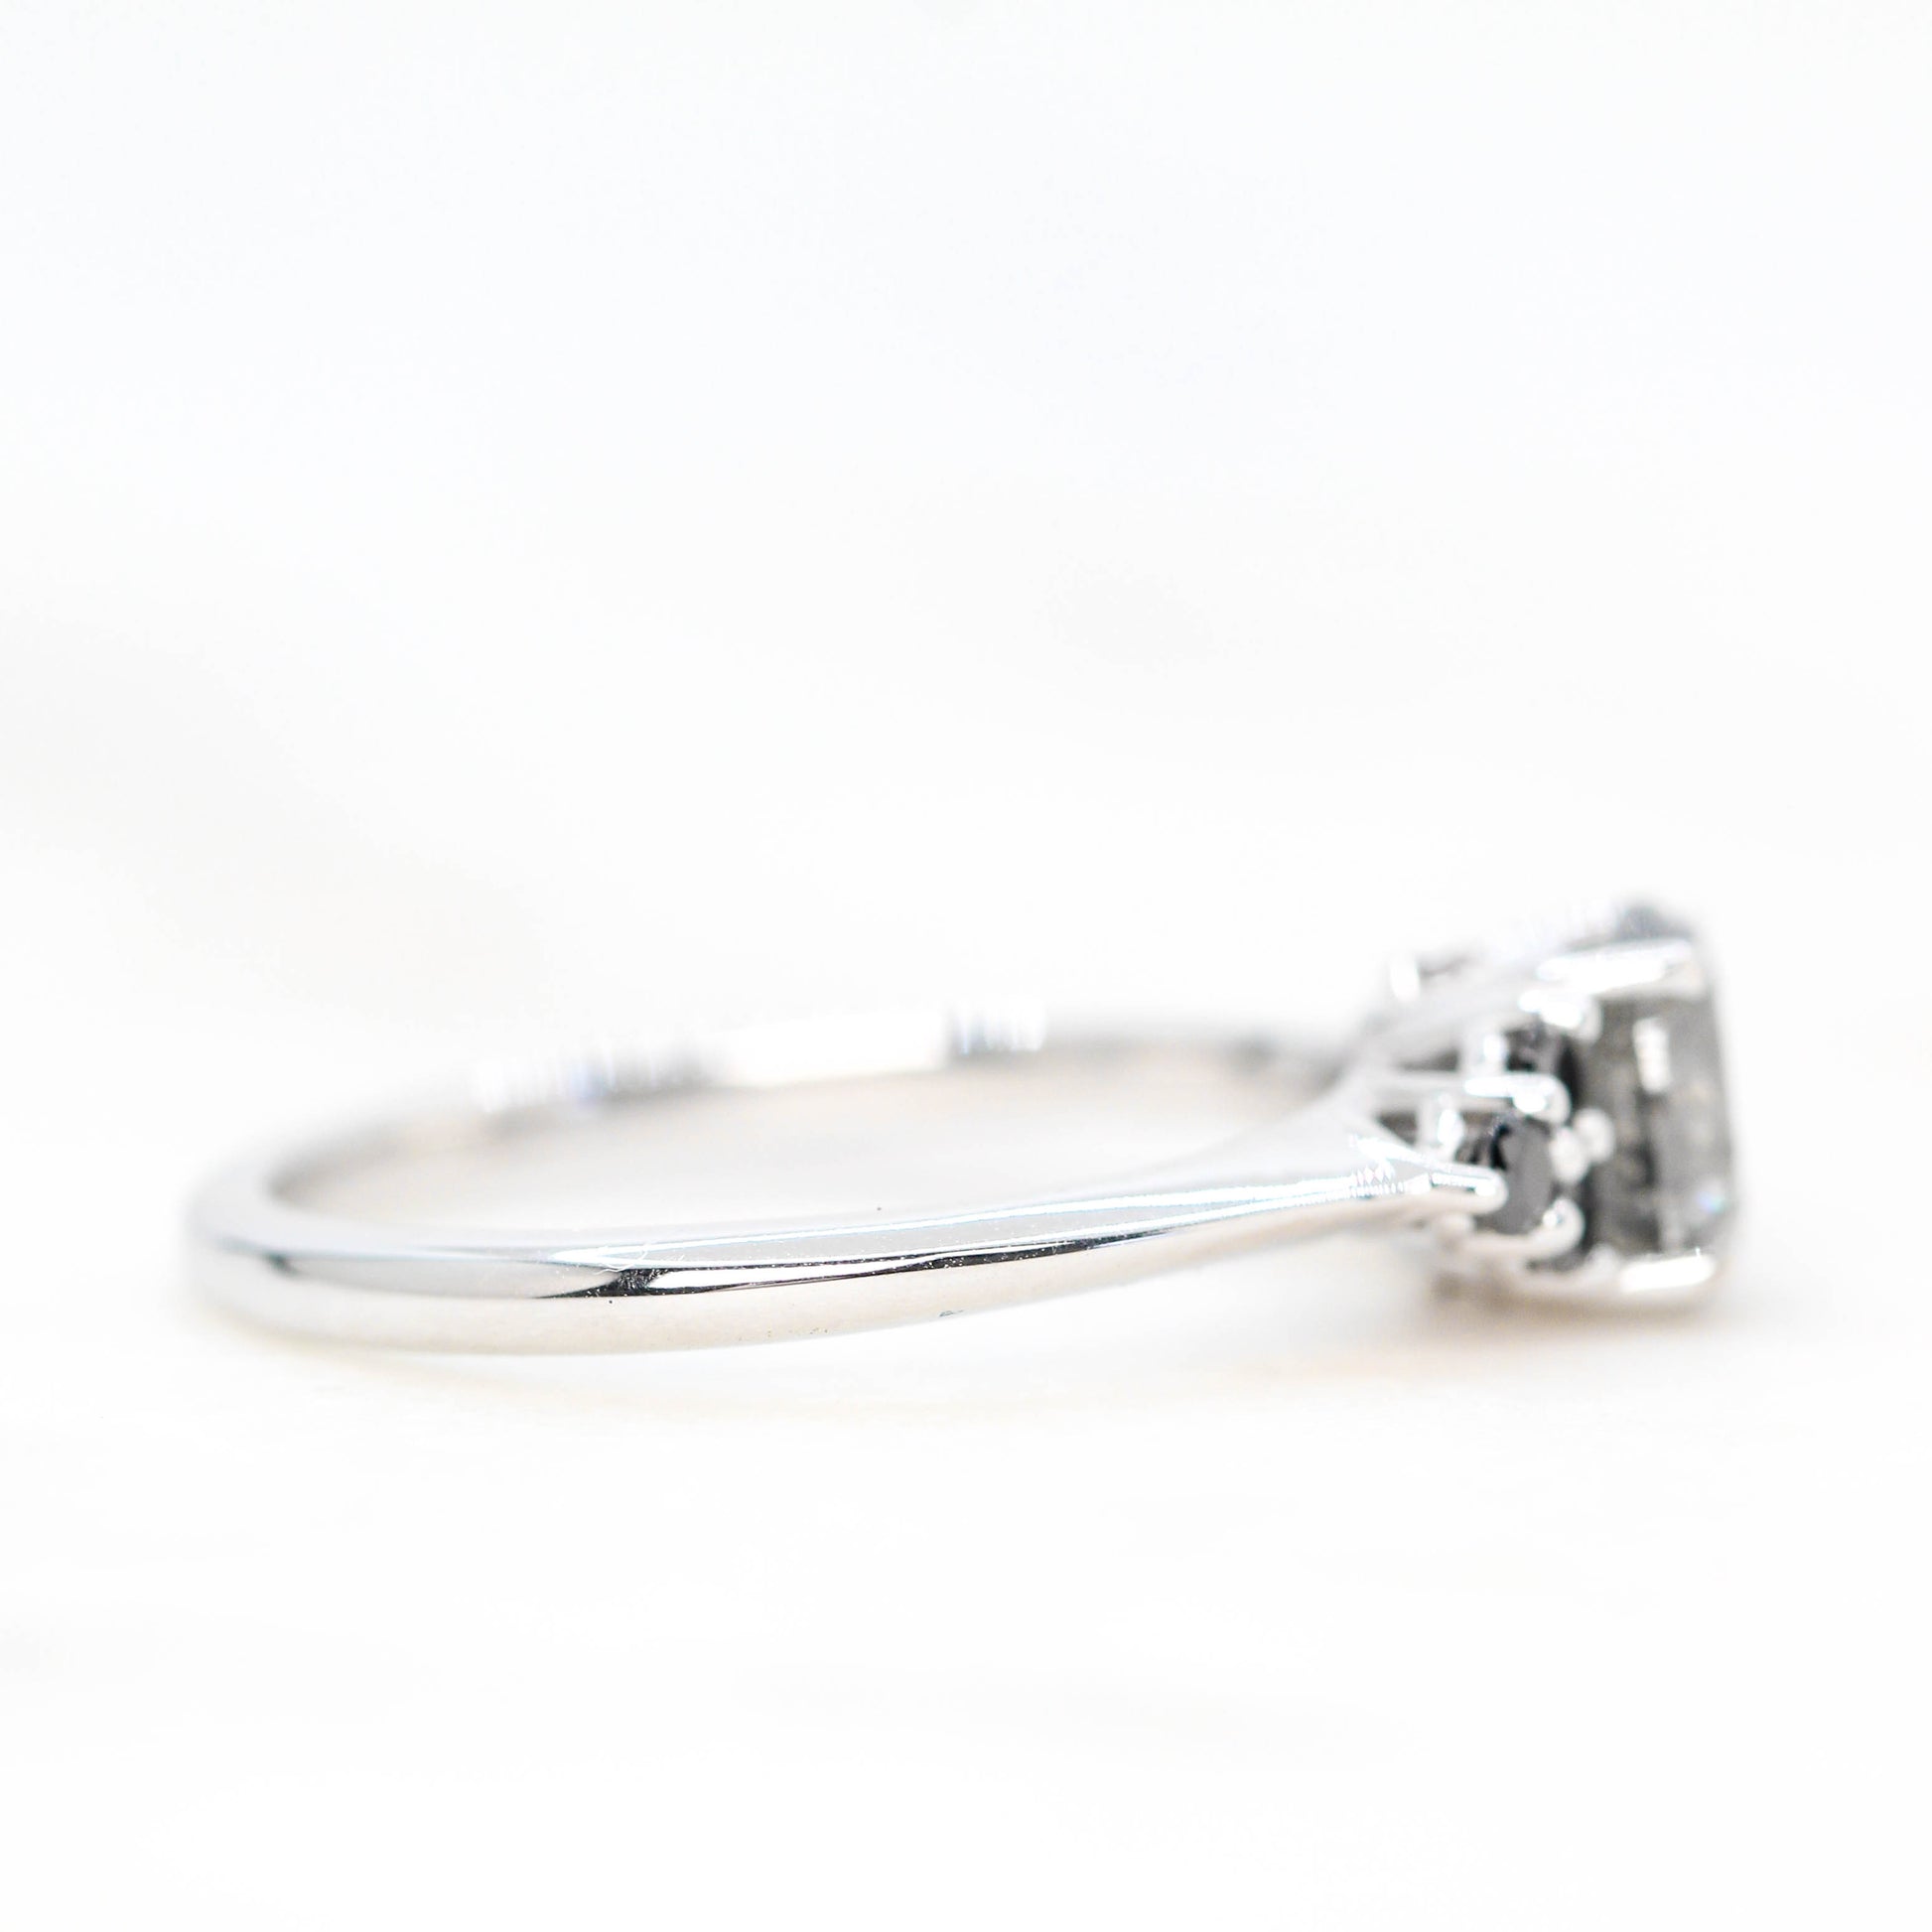 Aster Ring with a 1.10 Carat Dark Gray Round Diamond and Black Accent Diamonds in 14k White Gold - Ready to Size and Ship - Midwinter Co. Alternative Bridal Rings and Modern Fine Jewelry